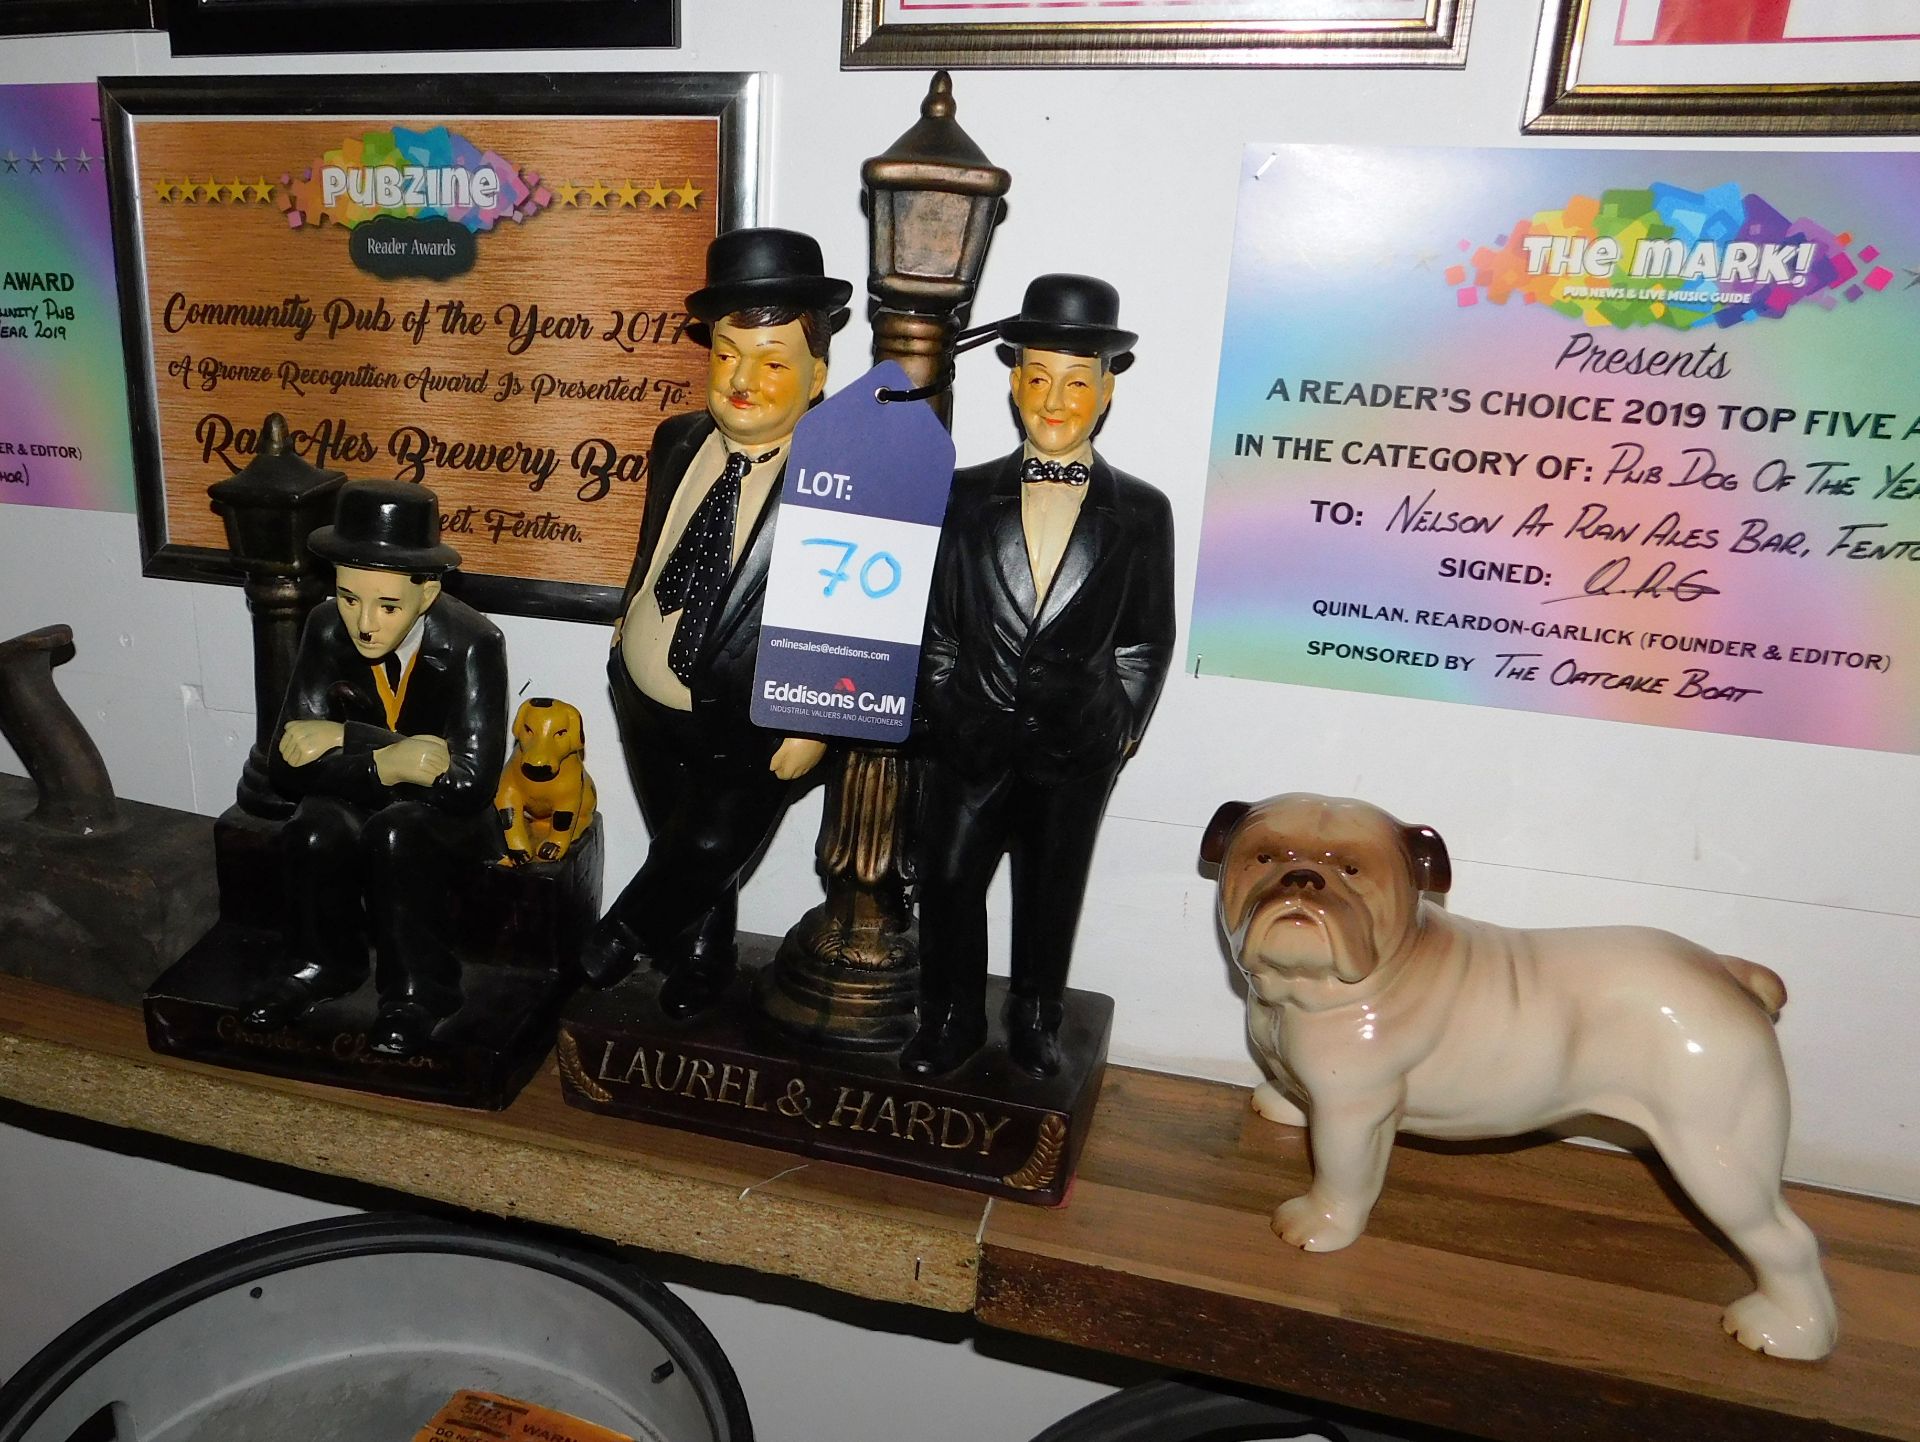 Charlie Chaplin, Laurel and Hardy and Dog Ornaments